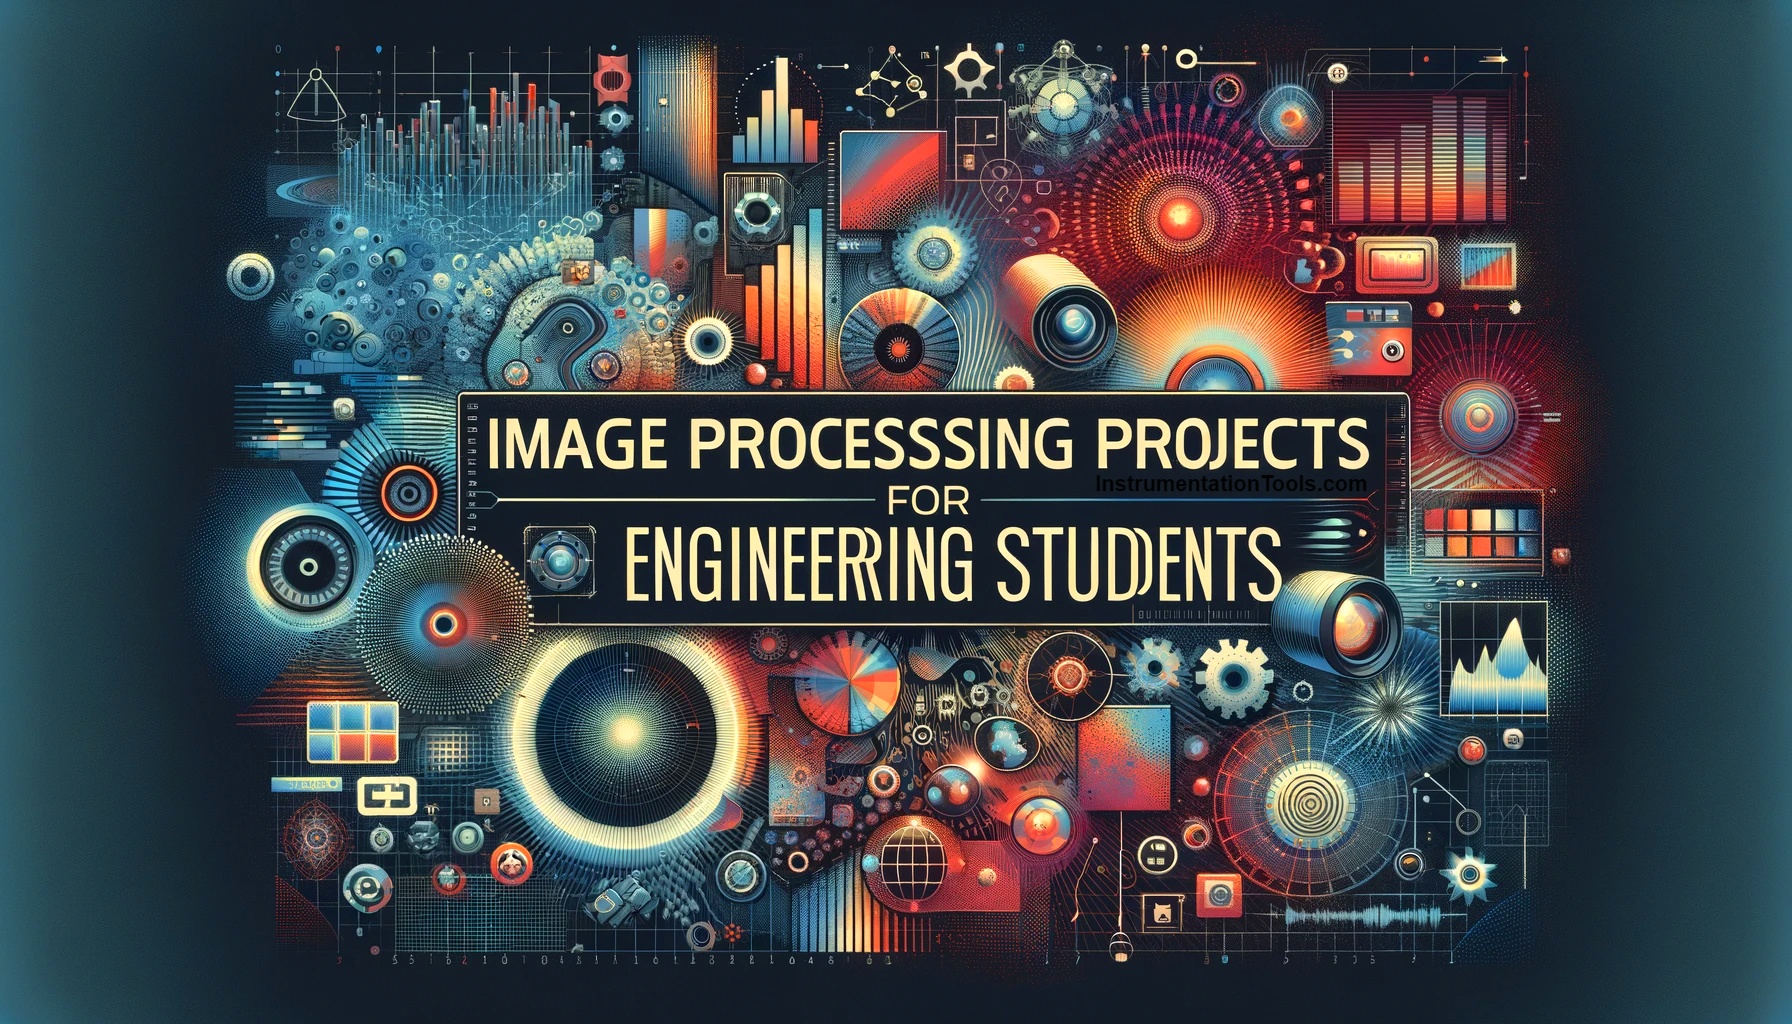 Image Processing Projects for Engineering Students